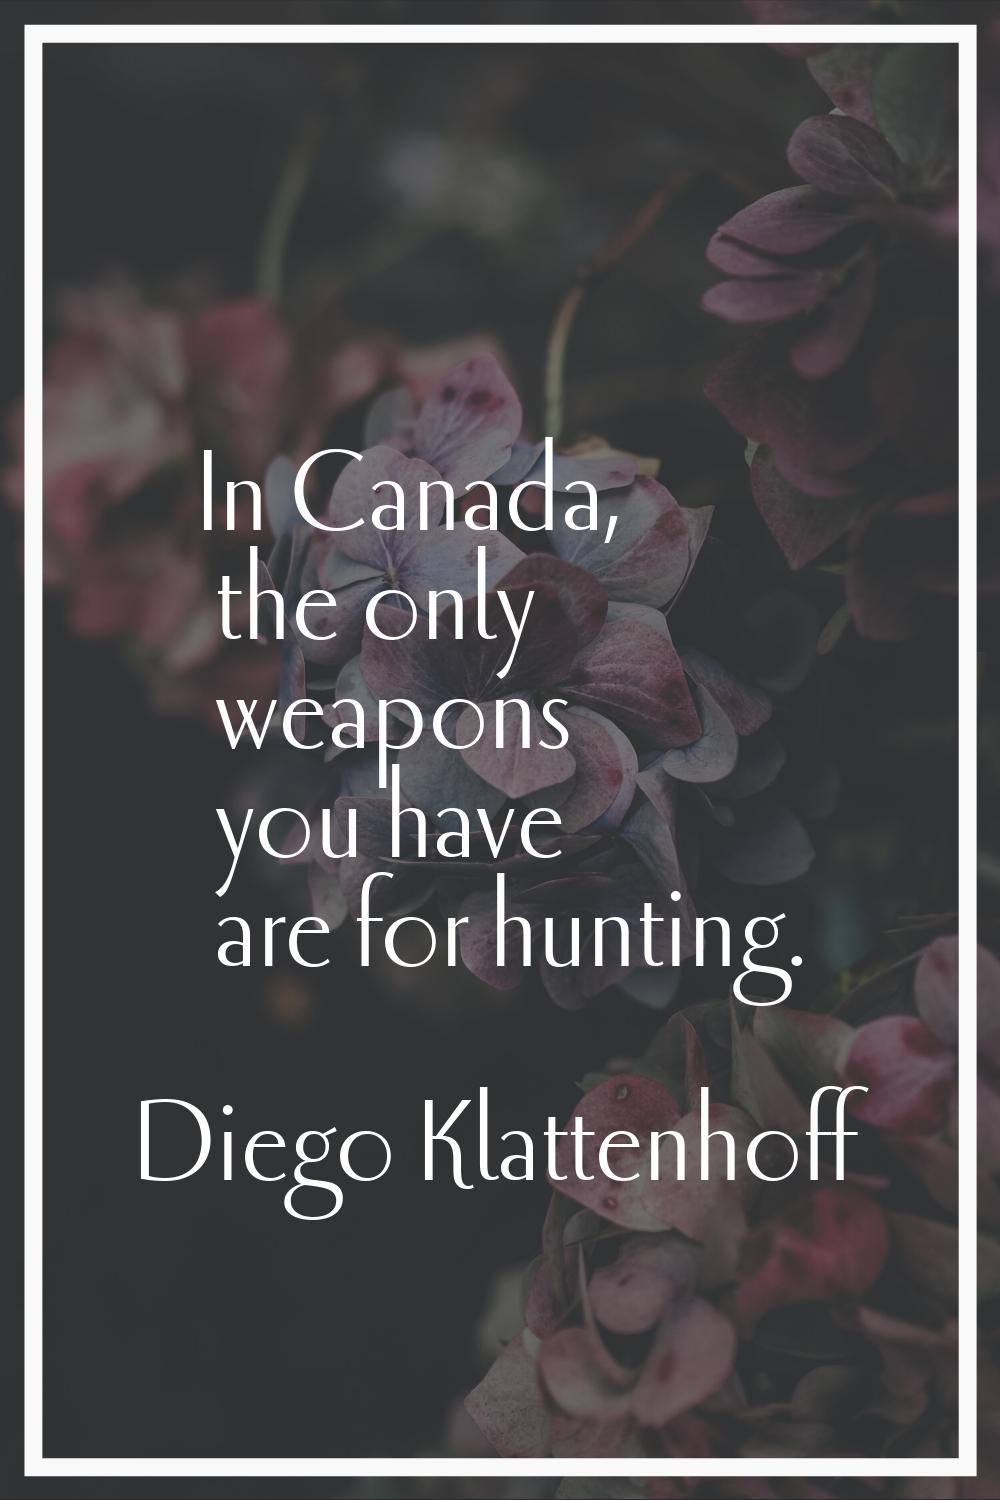 In Canada, the only weapons you have are for hunting.